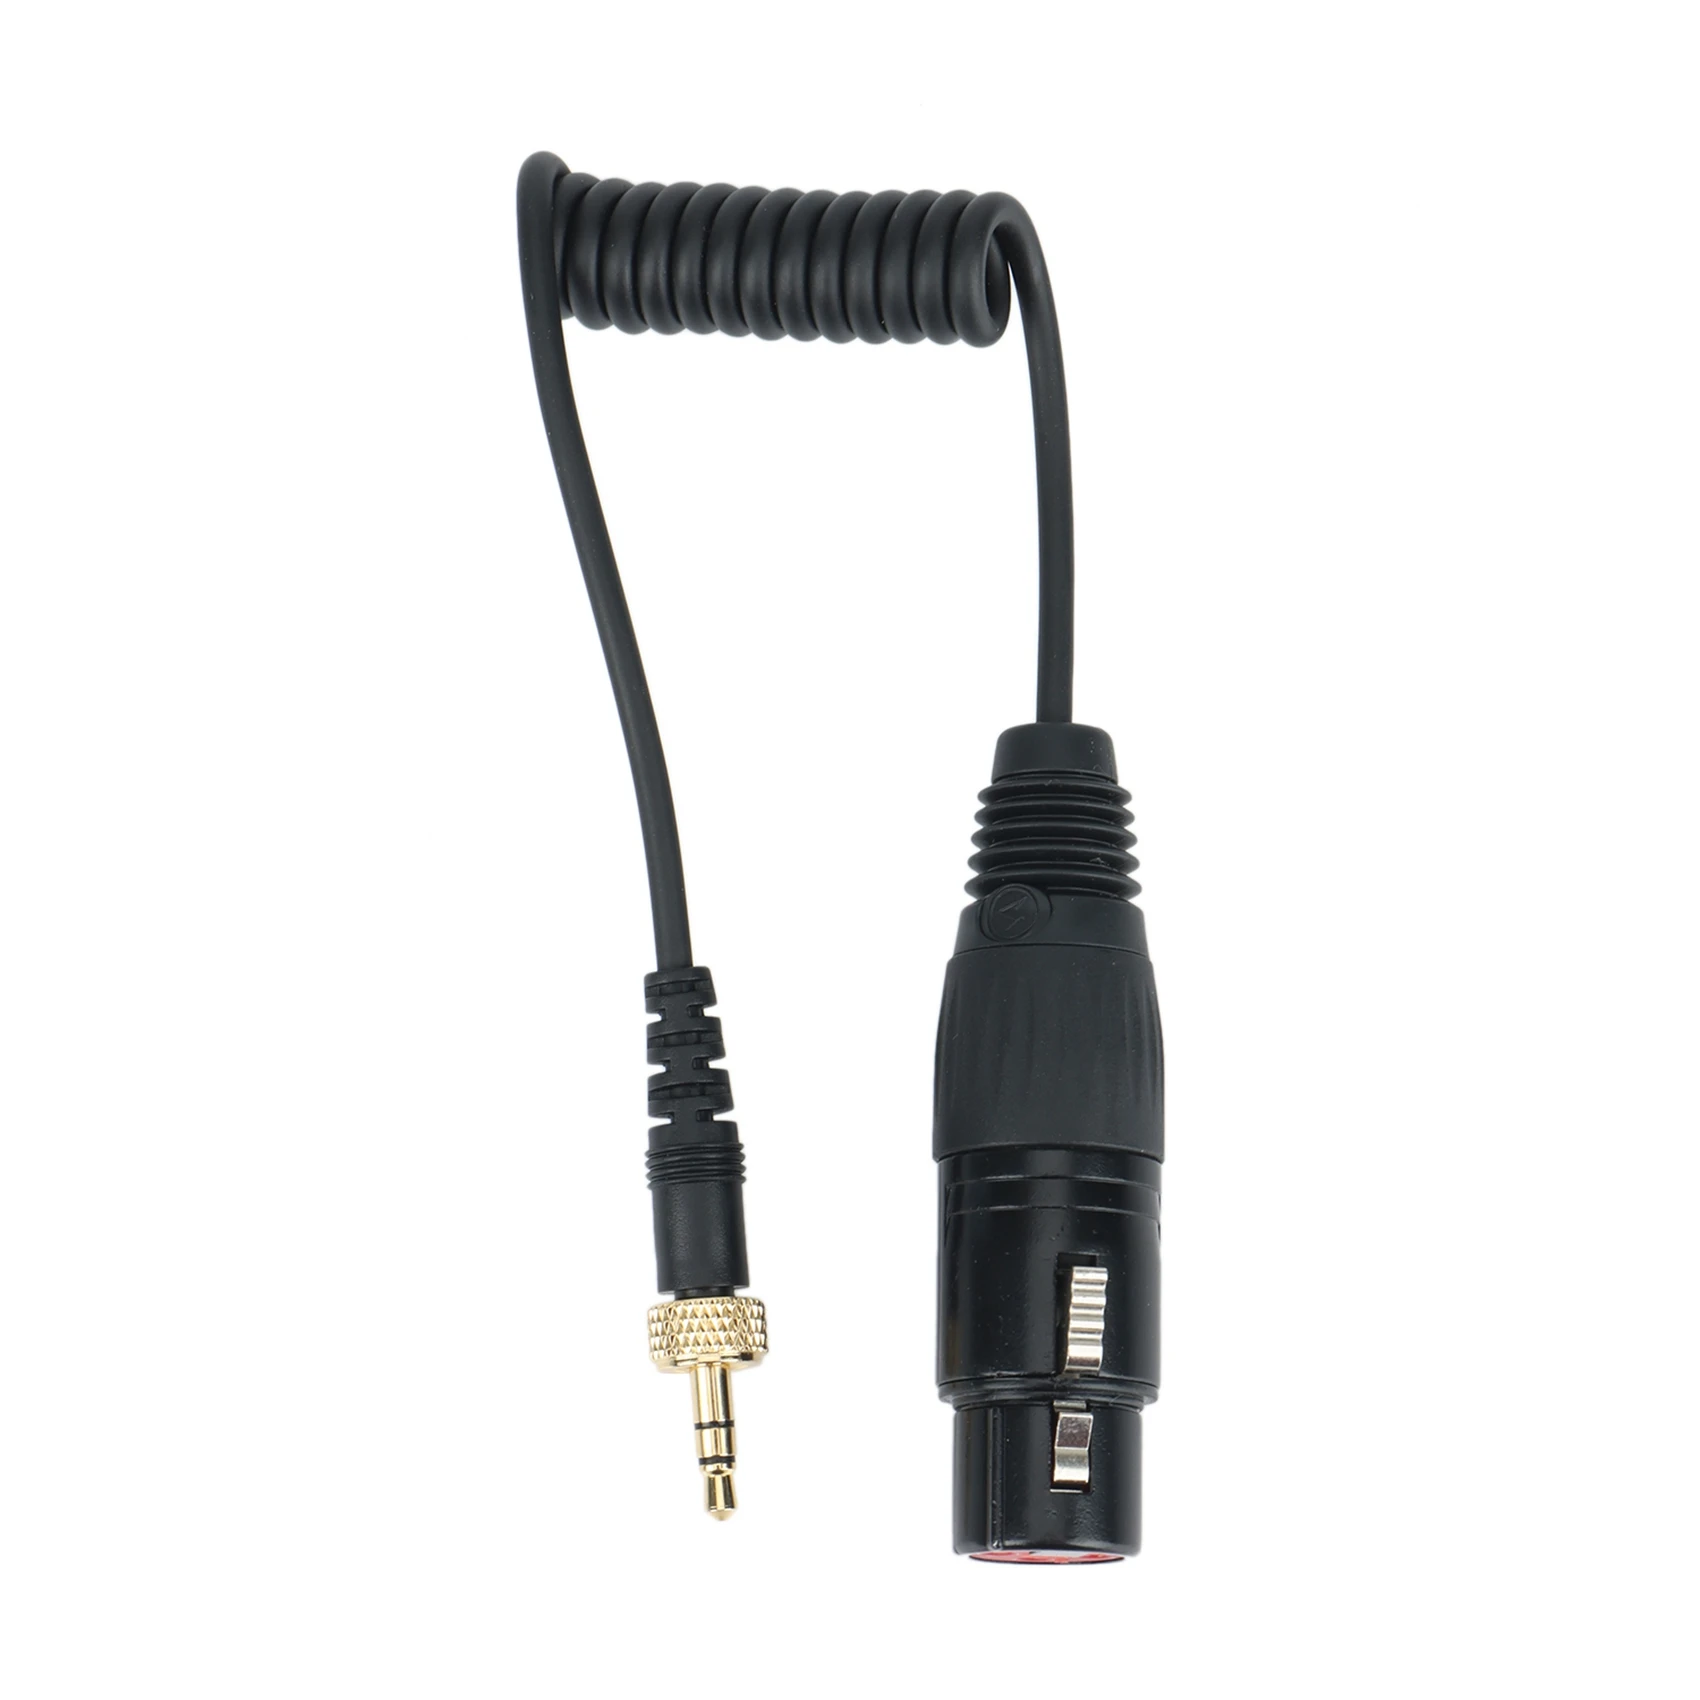 New-Saramonic Locking Type 3.5Mm To 3.5Mm Trs To Xlr Microphone Output Universal Audio Cable For Wireless Receivers